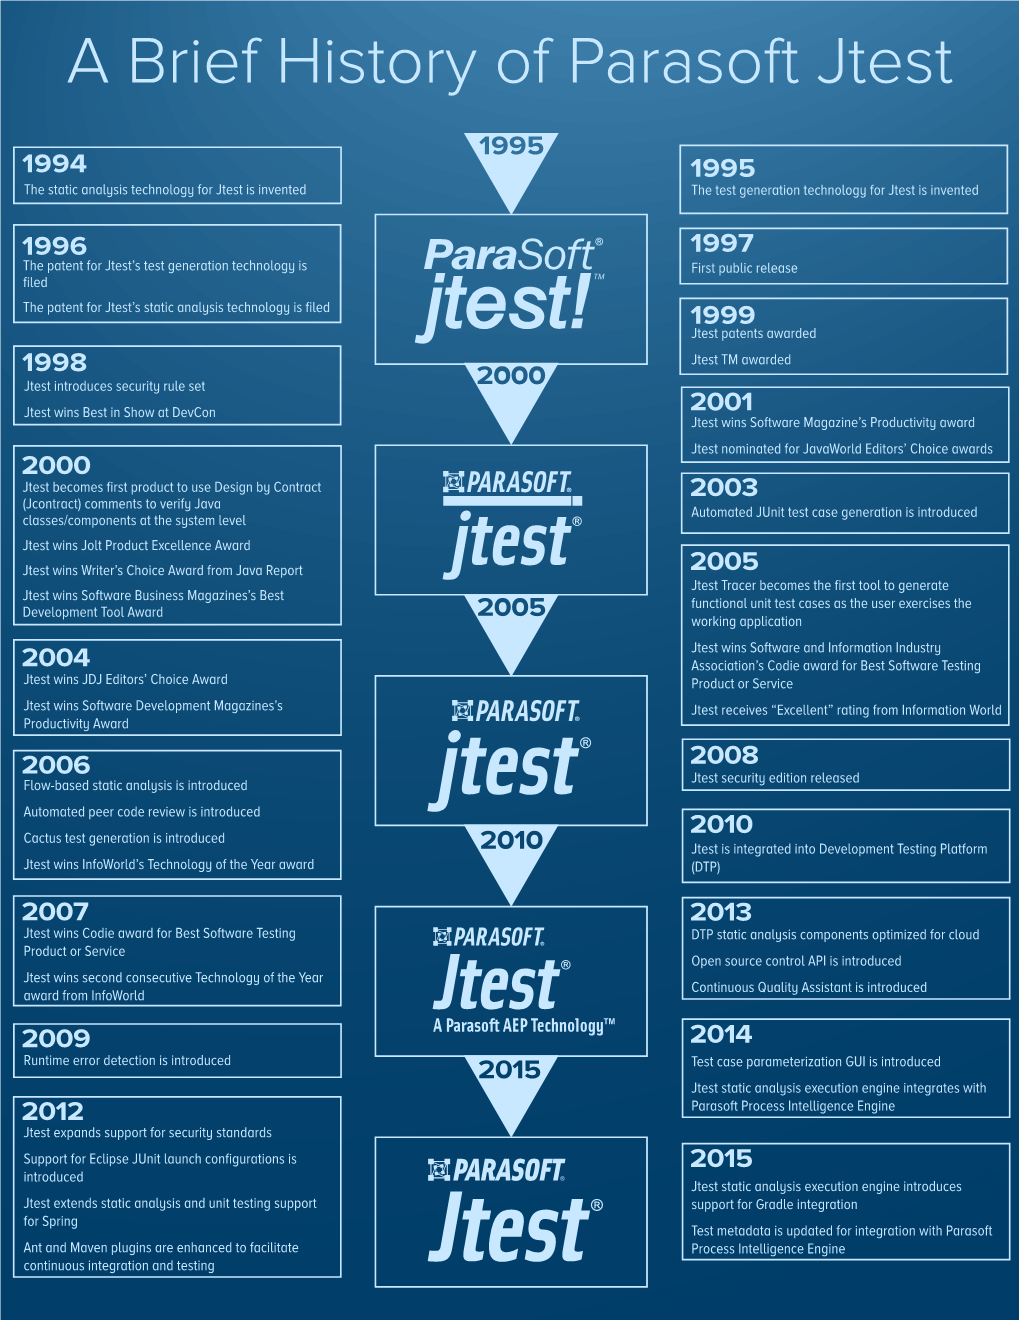 A Brief History of Parasoft Jtest